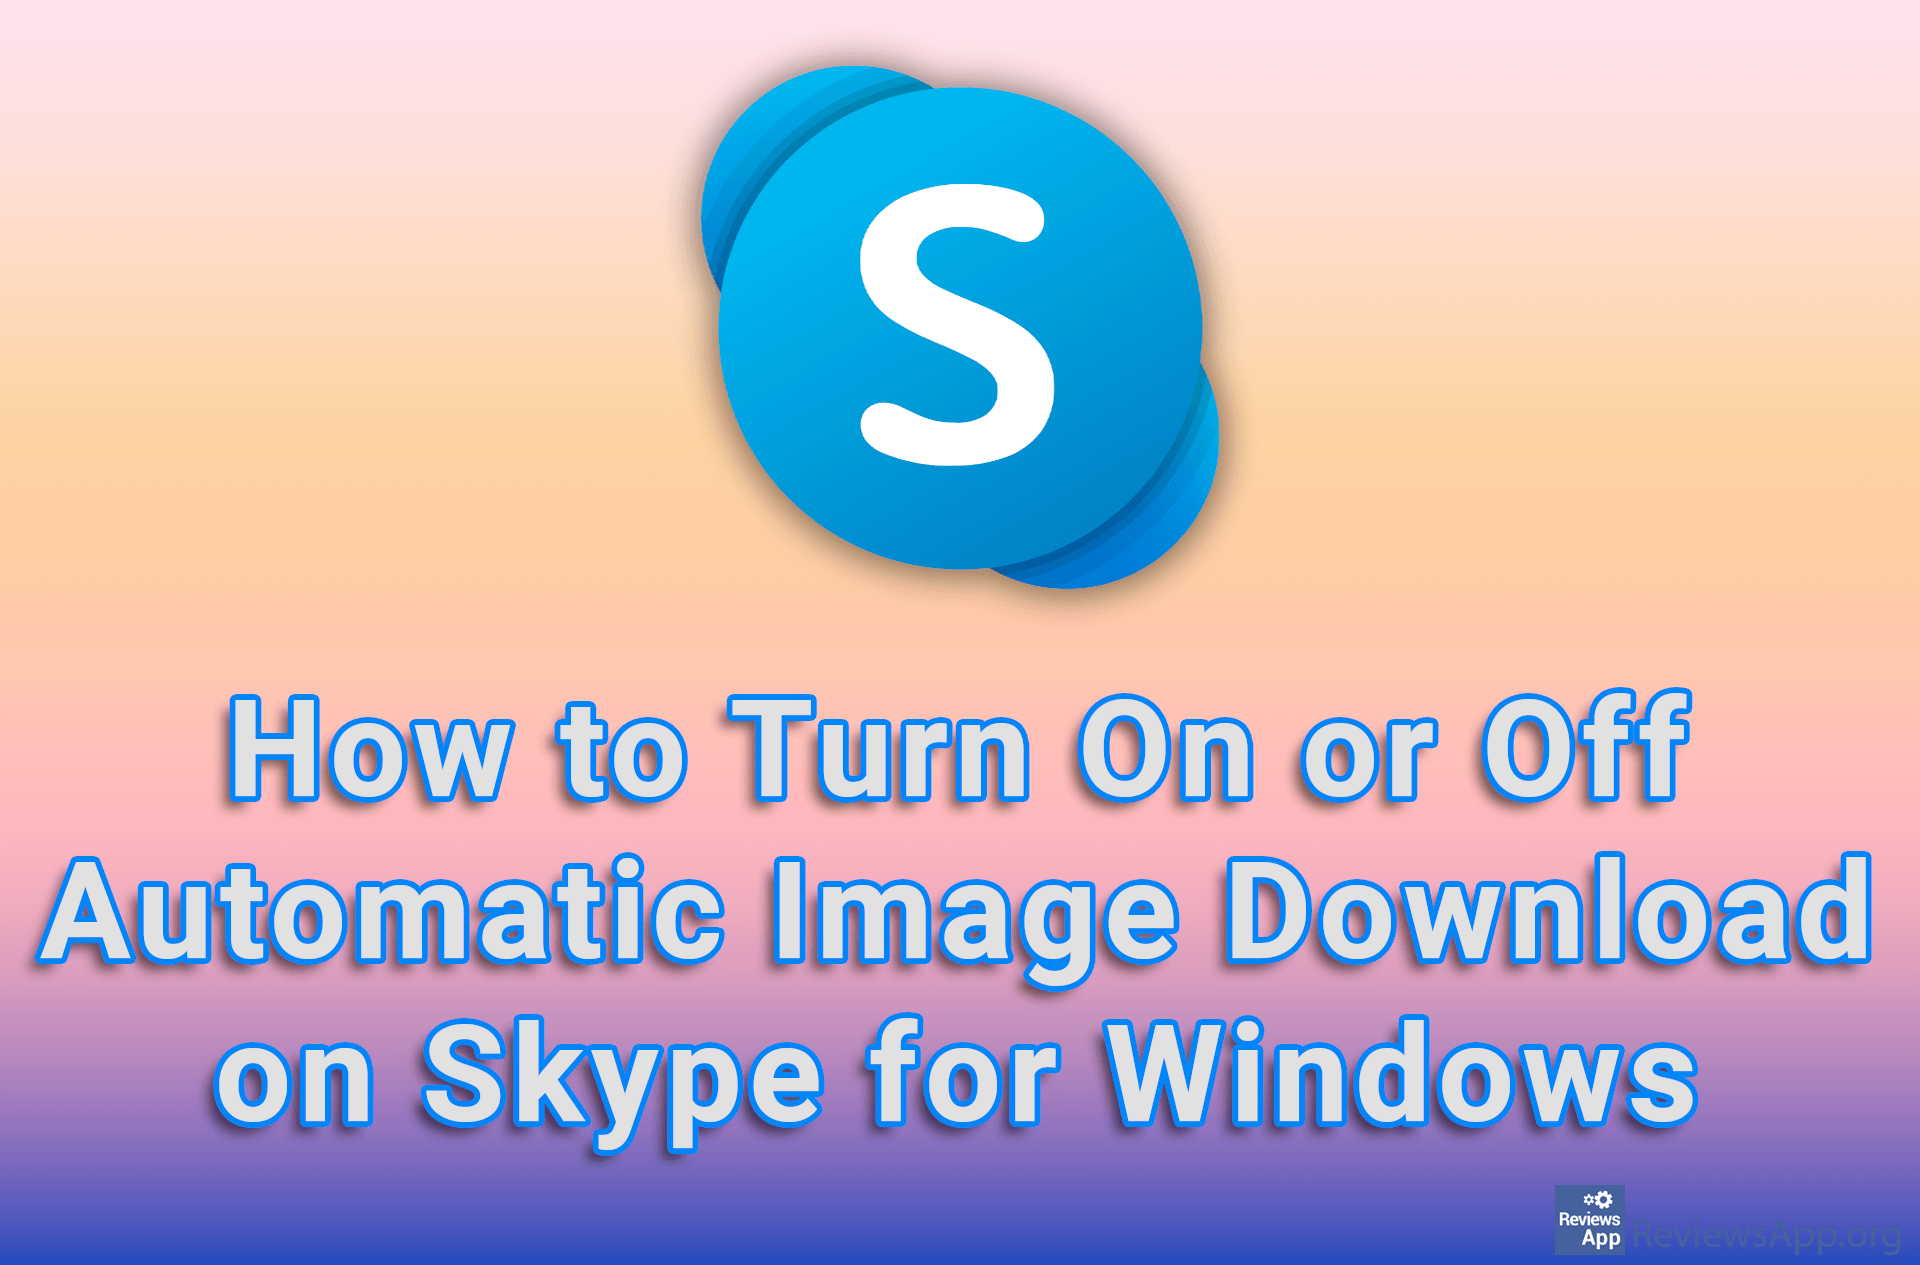 How to Turn On or Off Automatic Image Download on Skype for Windows